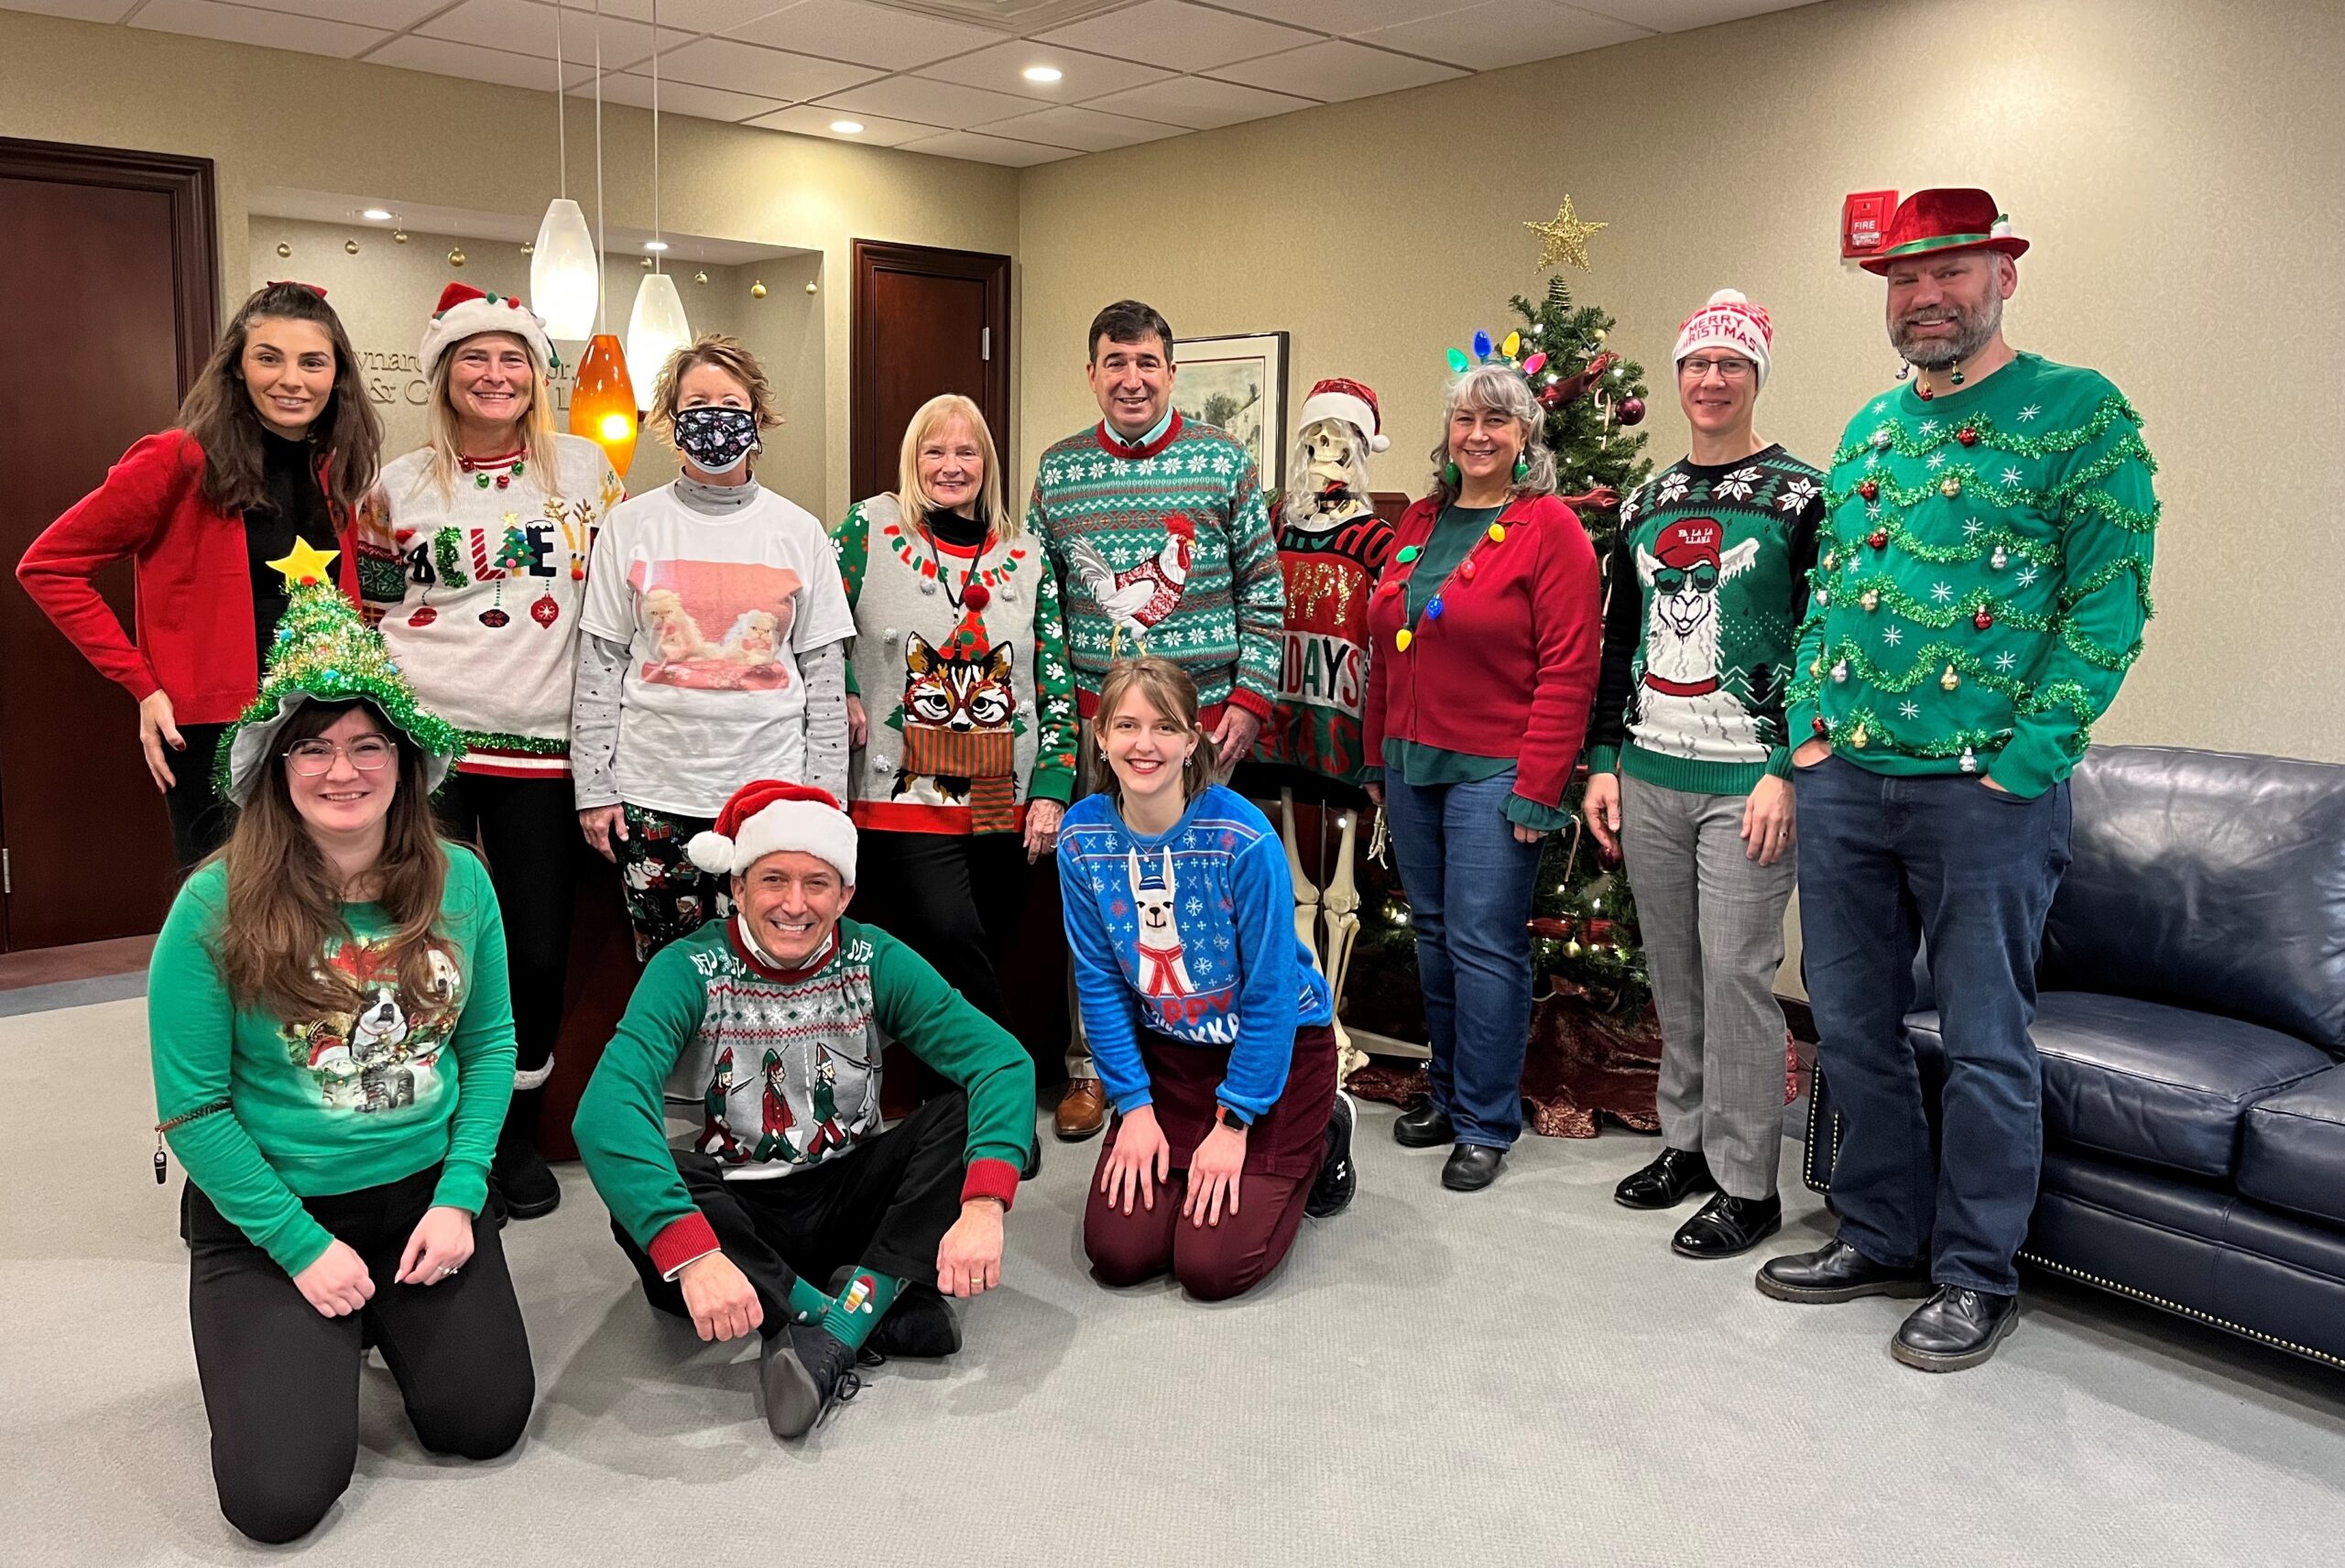 A group of members of the firm posing in their holiday-themed outfits